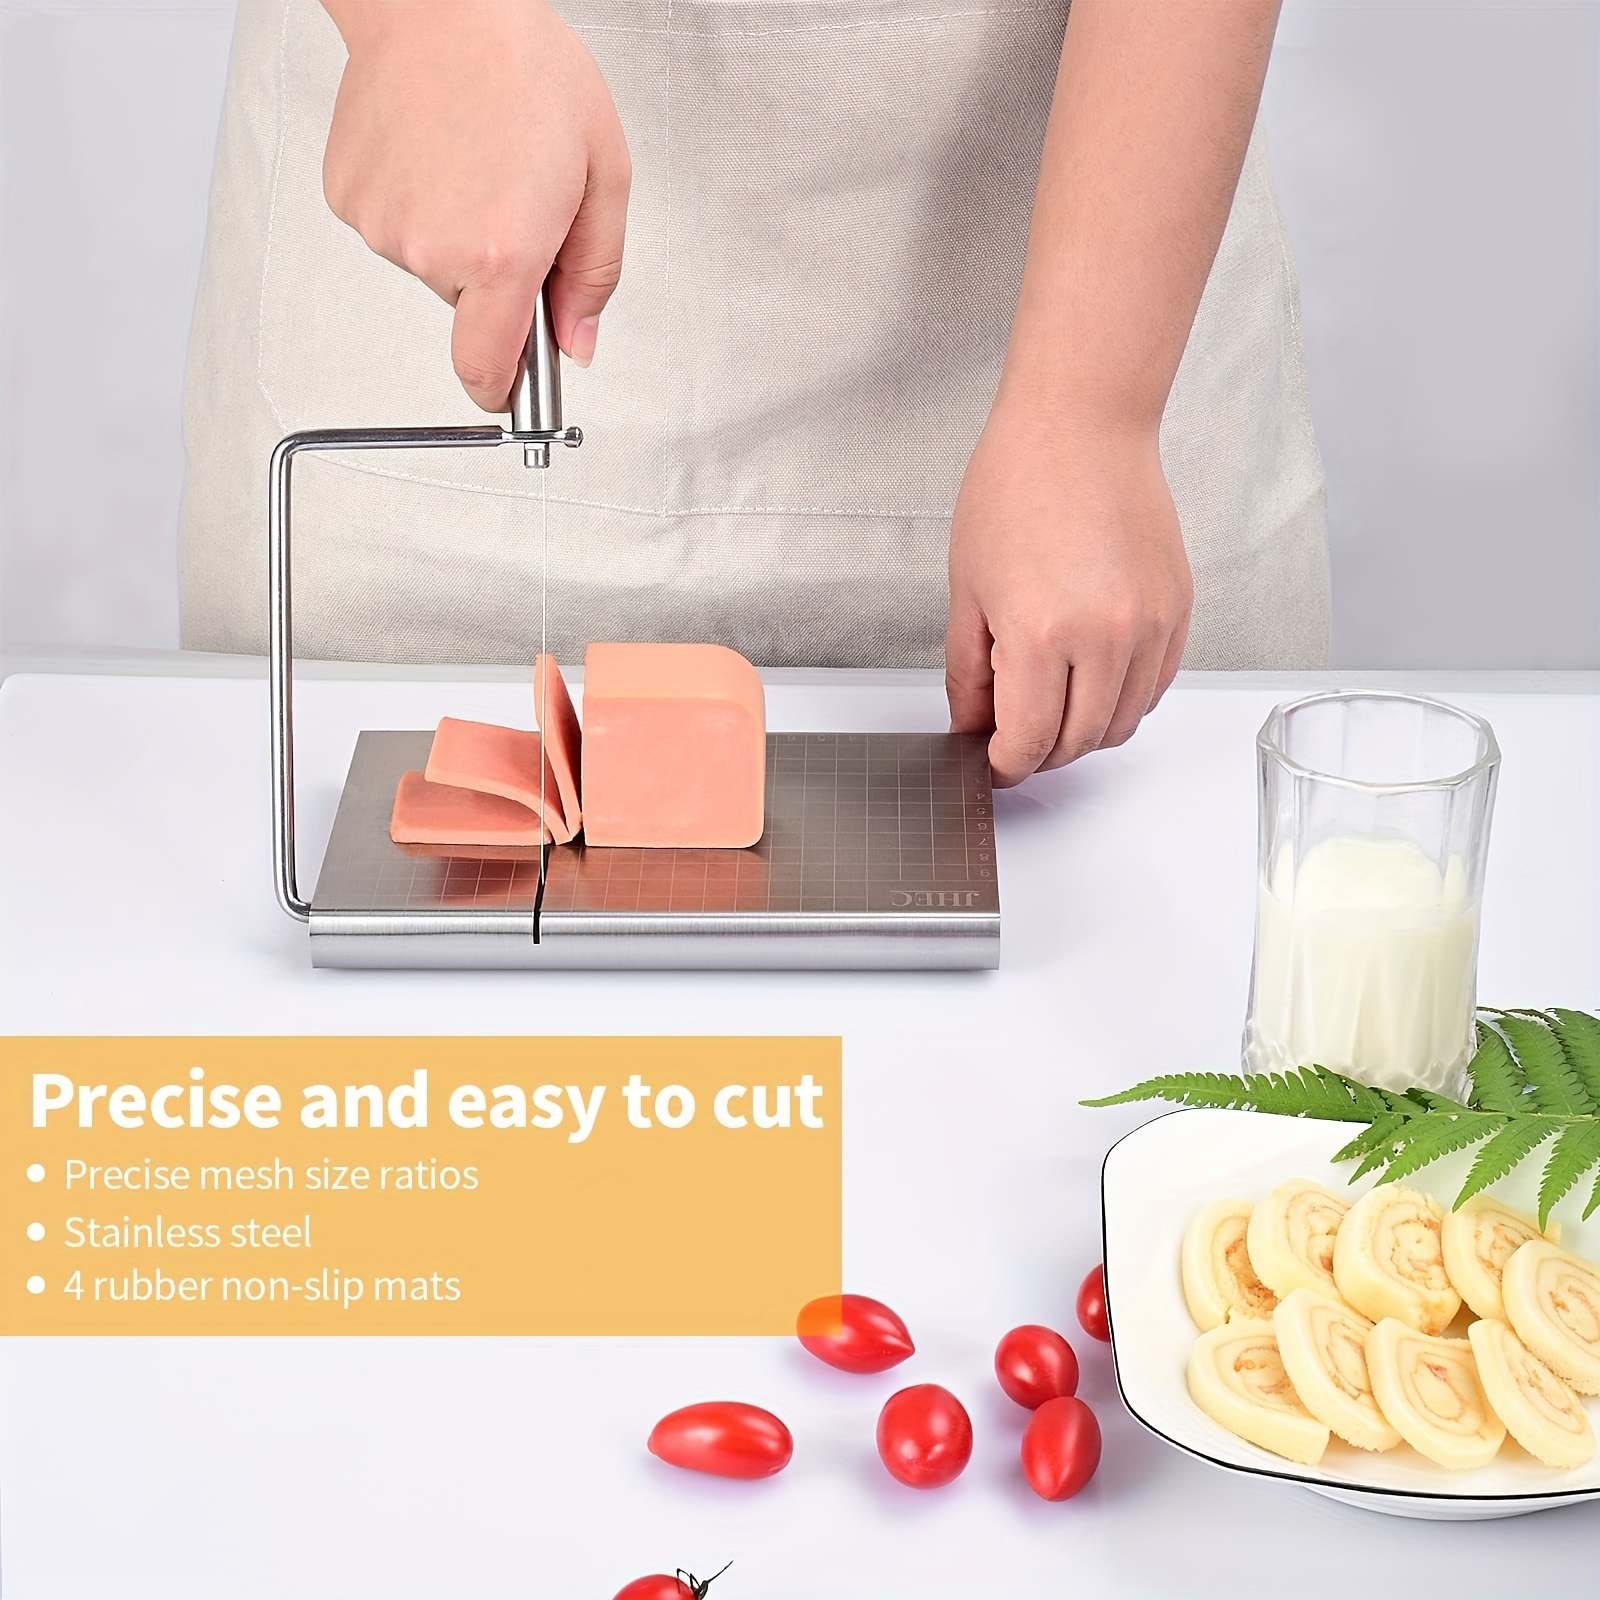 Cheese Slicer & Cheese Cutter - Cheese Slicer with Wire for Block Cheese -  Cheese Cutter Board With 5 Replacement Wires - Stainless Steel Precise